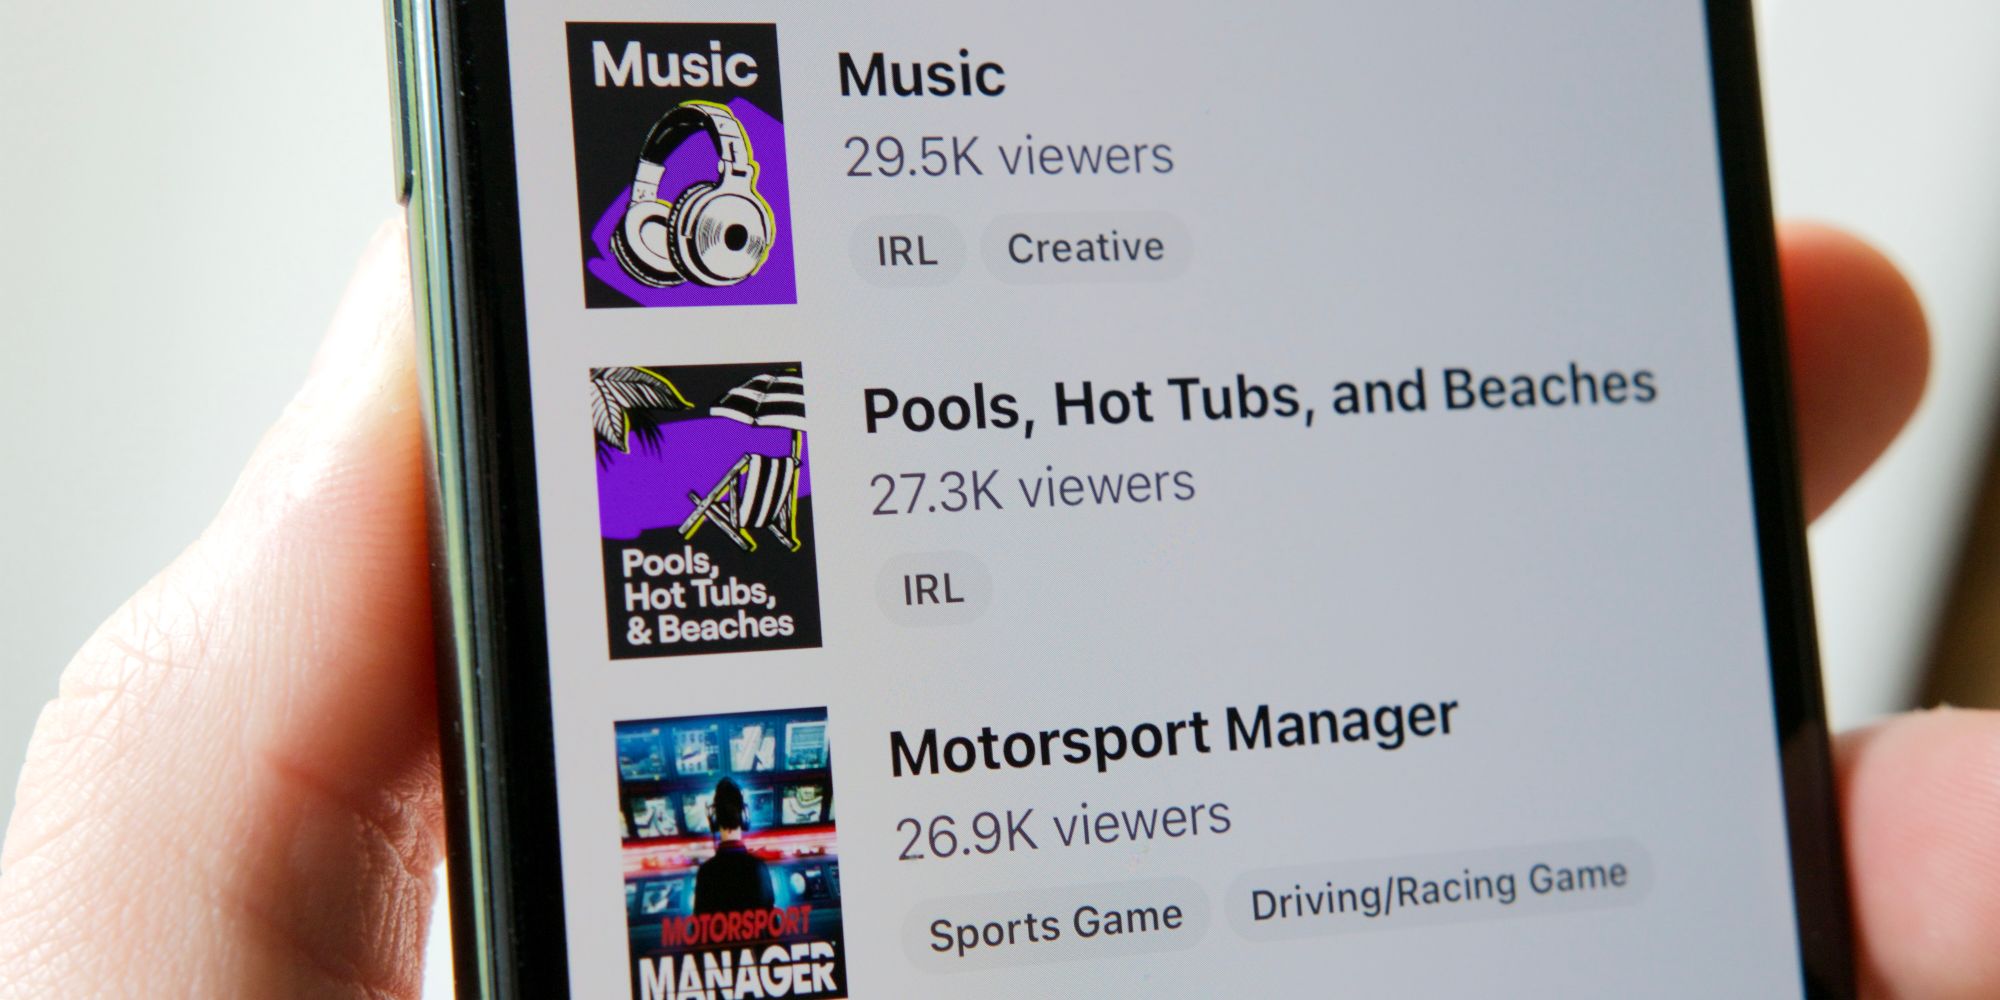 The Pools, Hot Tubs, and Beaches category in the Twitch app